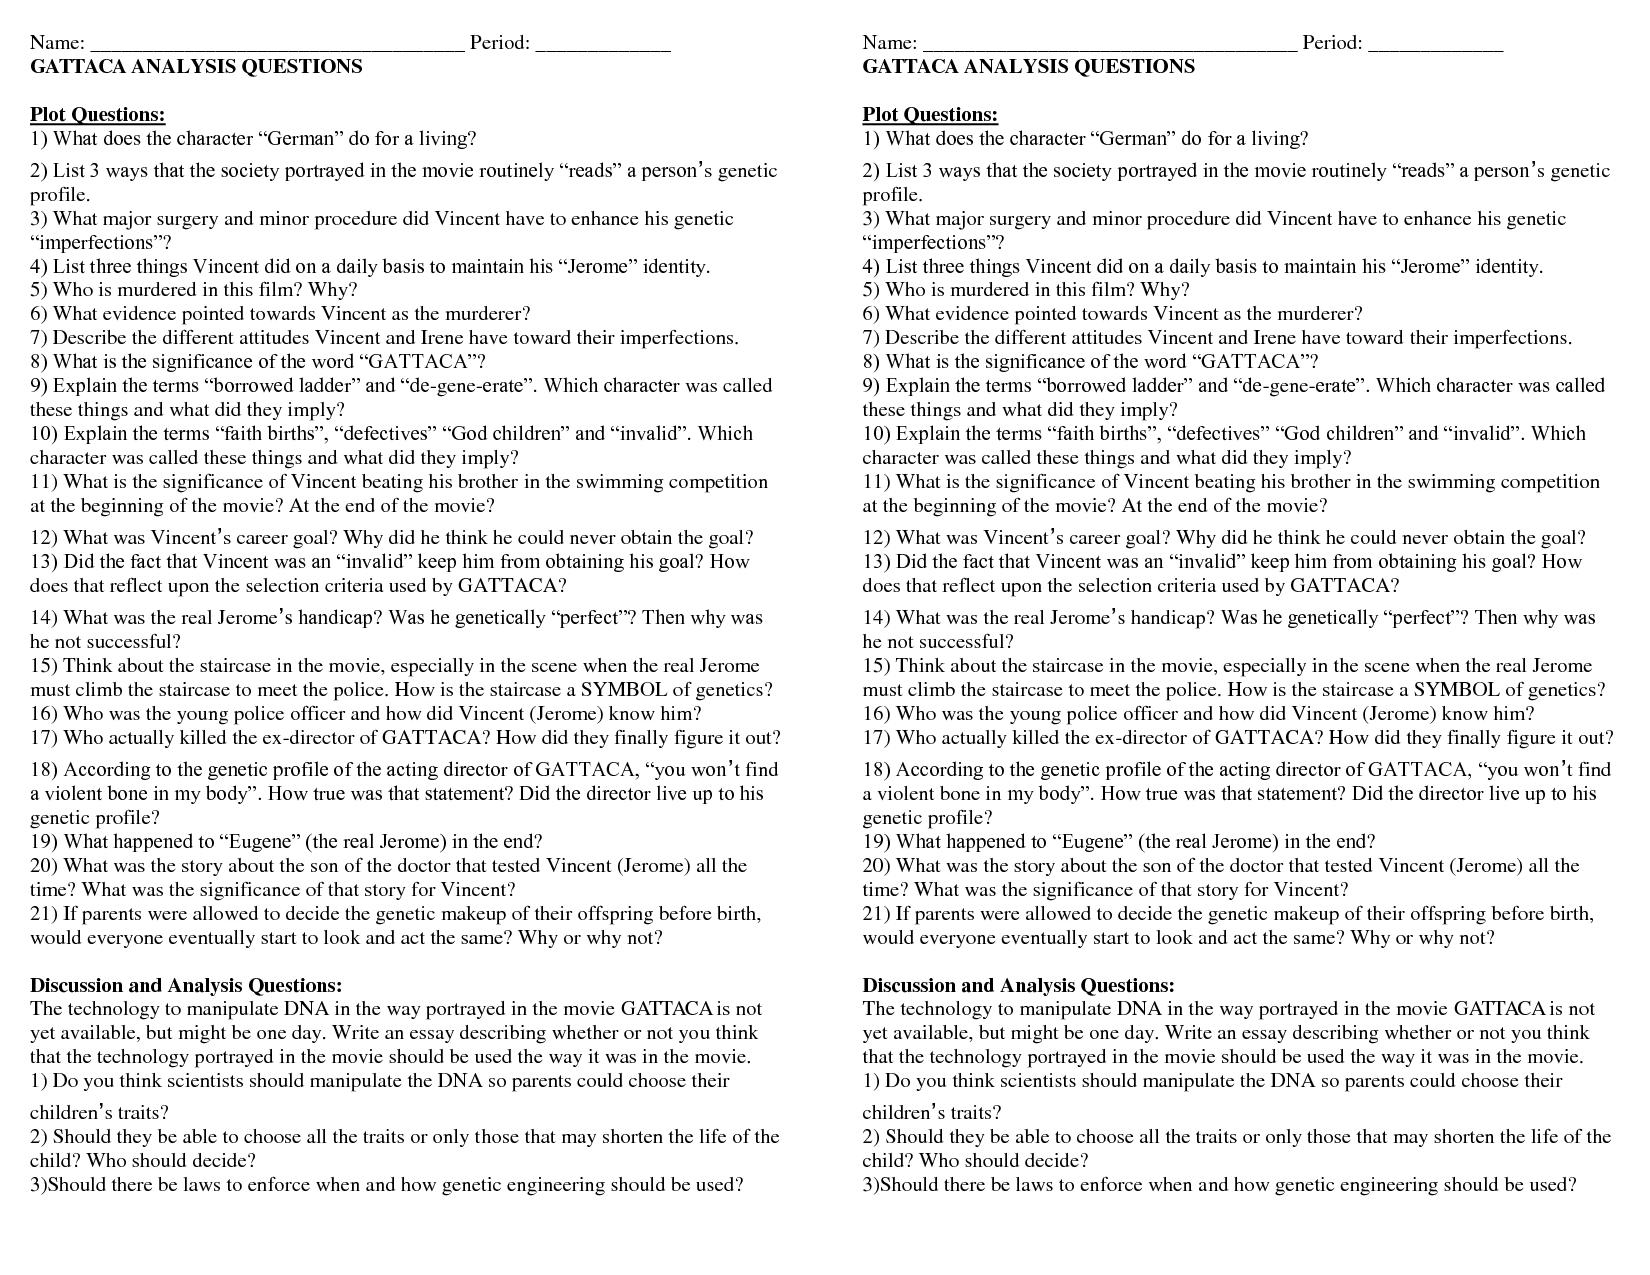 gattaca-movie-questions-and-answers-31-fresh-the-movie-worksheet-answers-free-worksheet